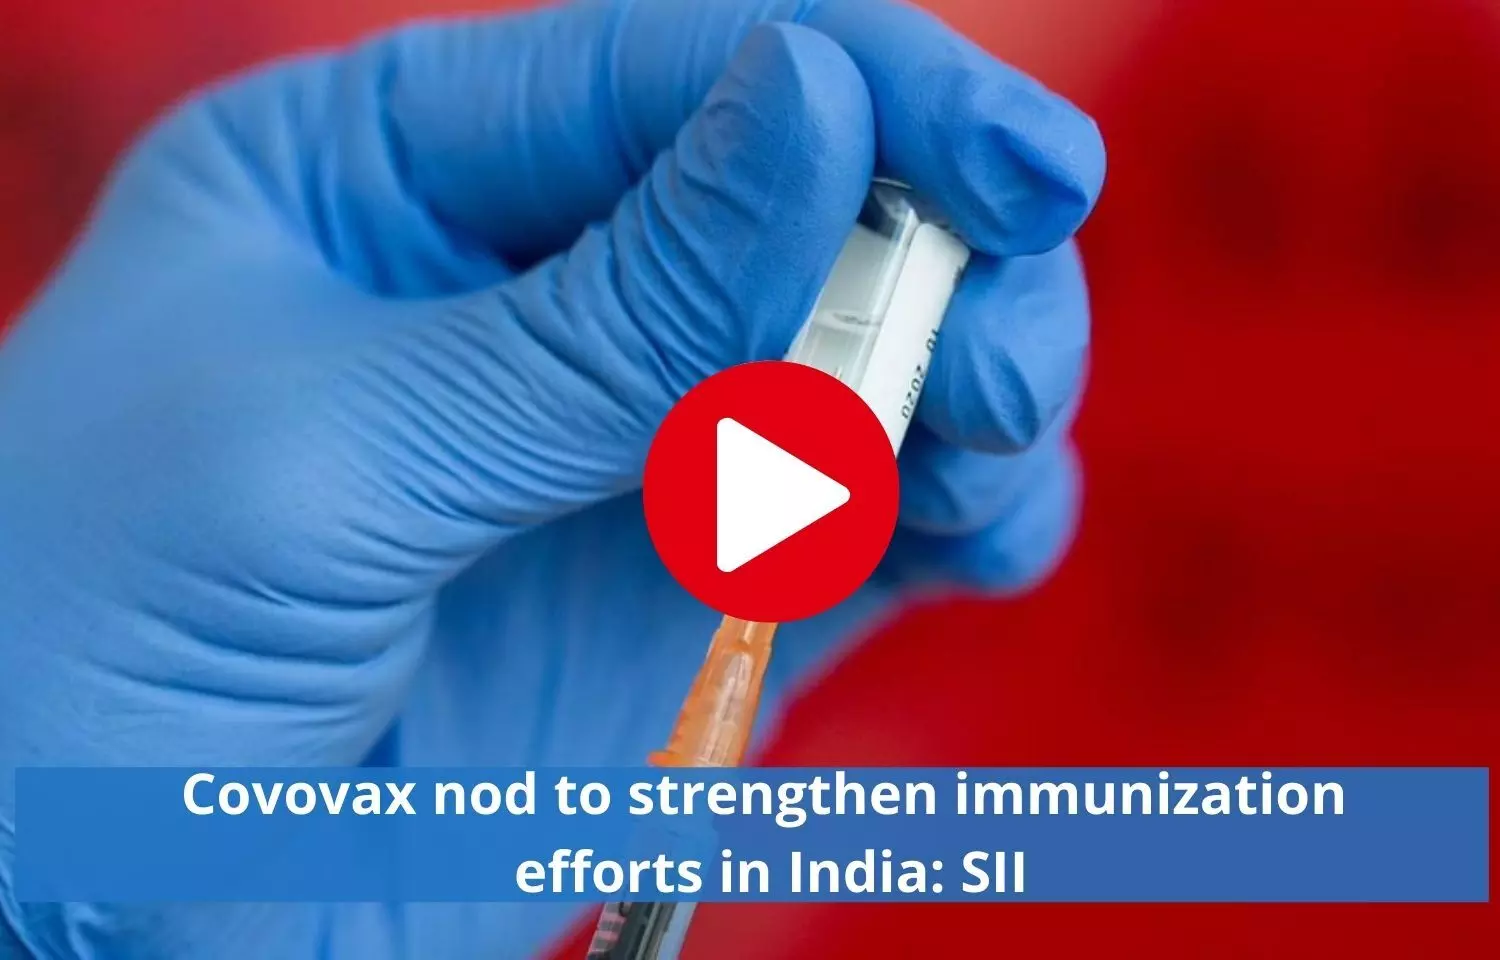 Covovax nod to strengthen immunization efforts in India: SII